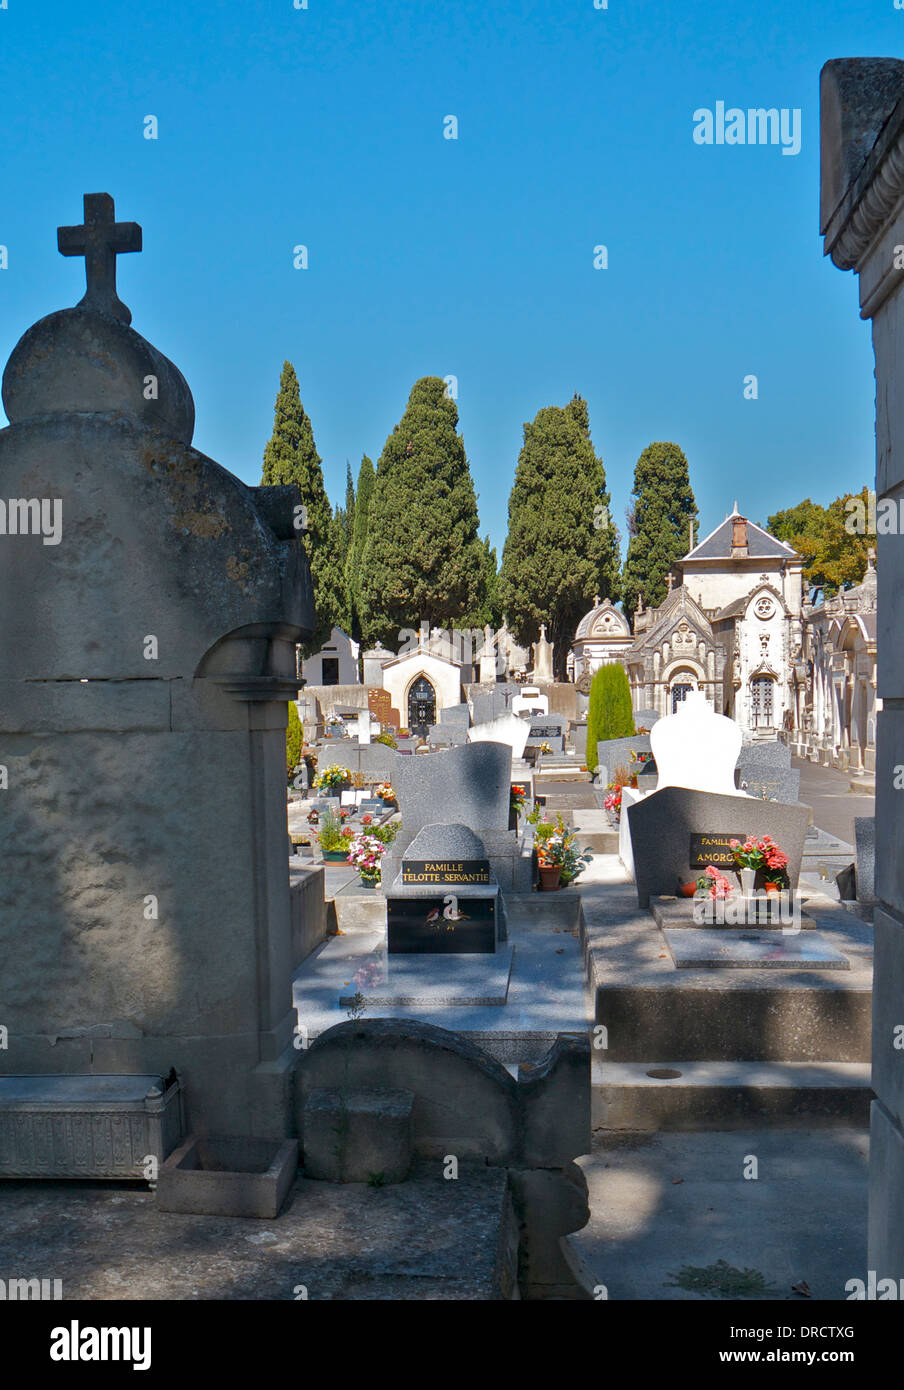 Grave stones in the historic town Caunes-Minervios  France Stock Photo